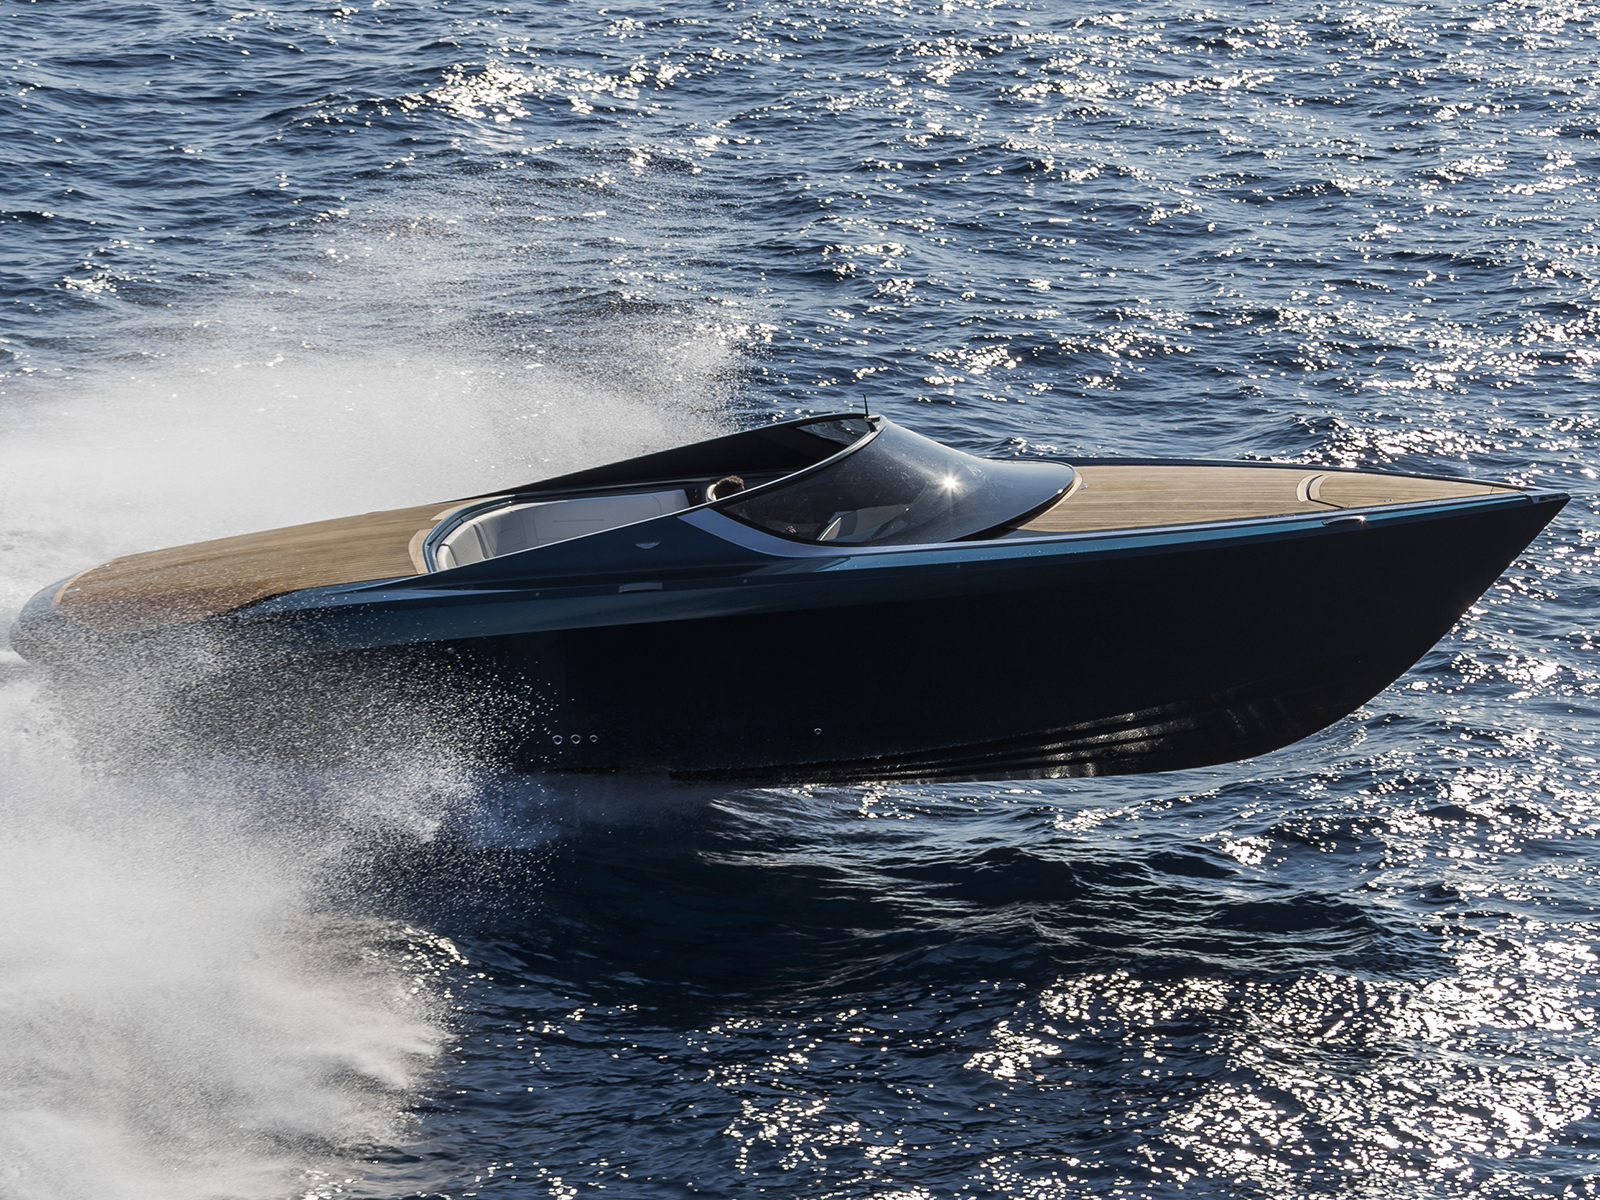 The Aston Martin AM 37 powerboat cuts through the water